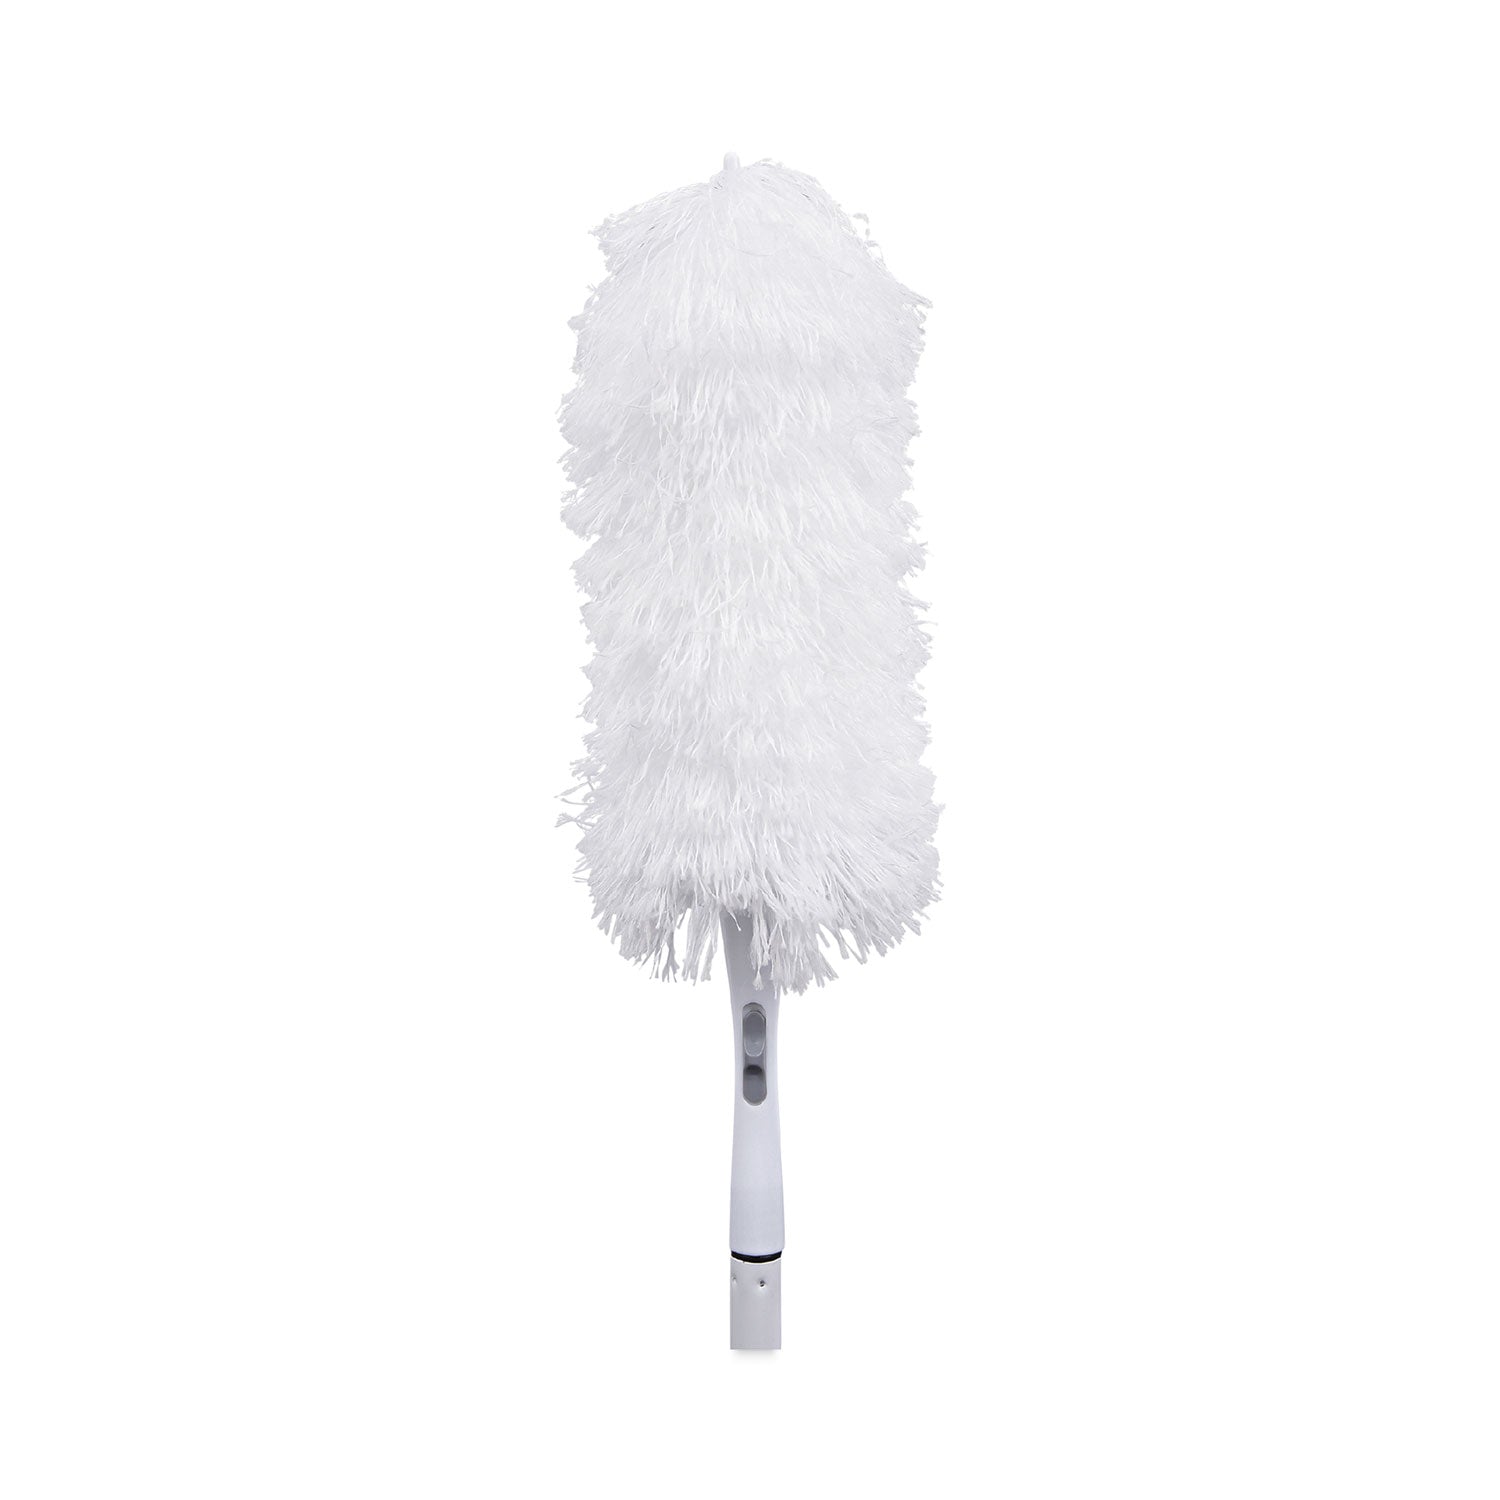 microfeather-duster-microfiber-feathers-washable-23-white_bwkmicroduster - 1